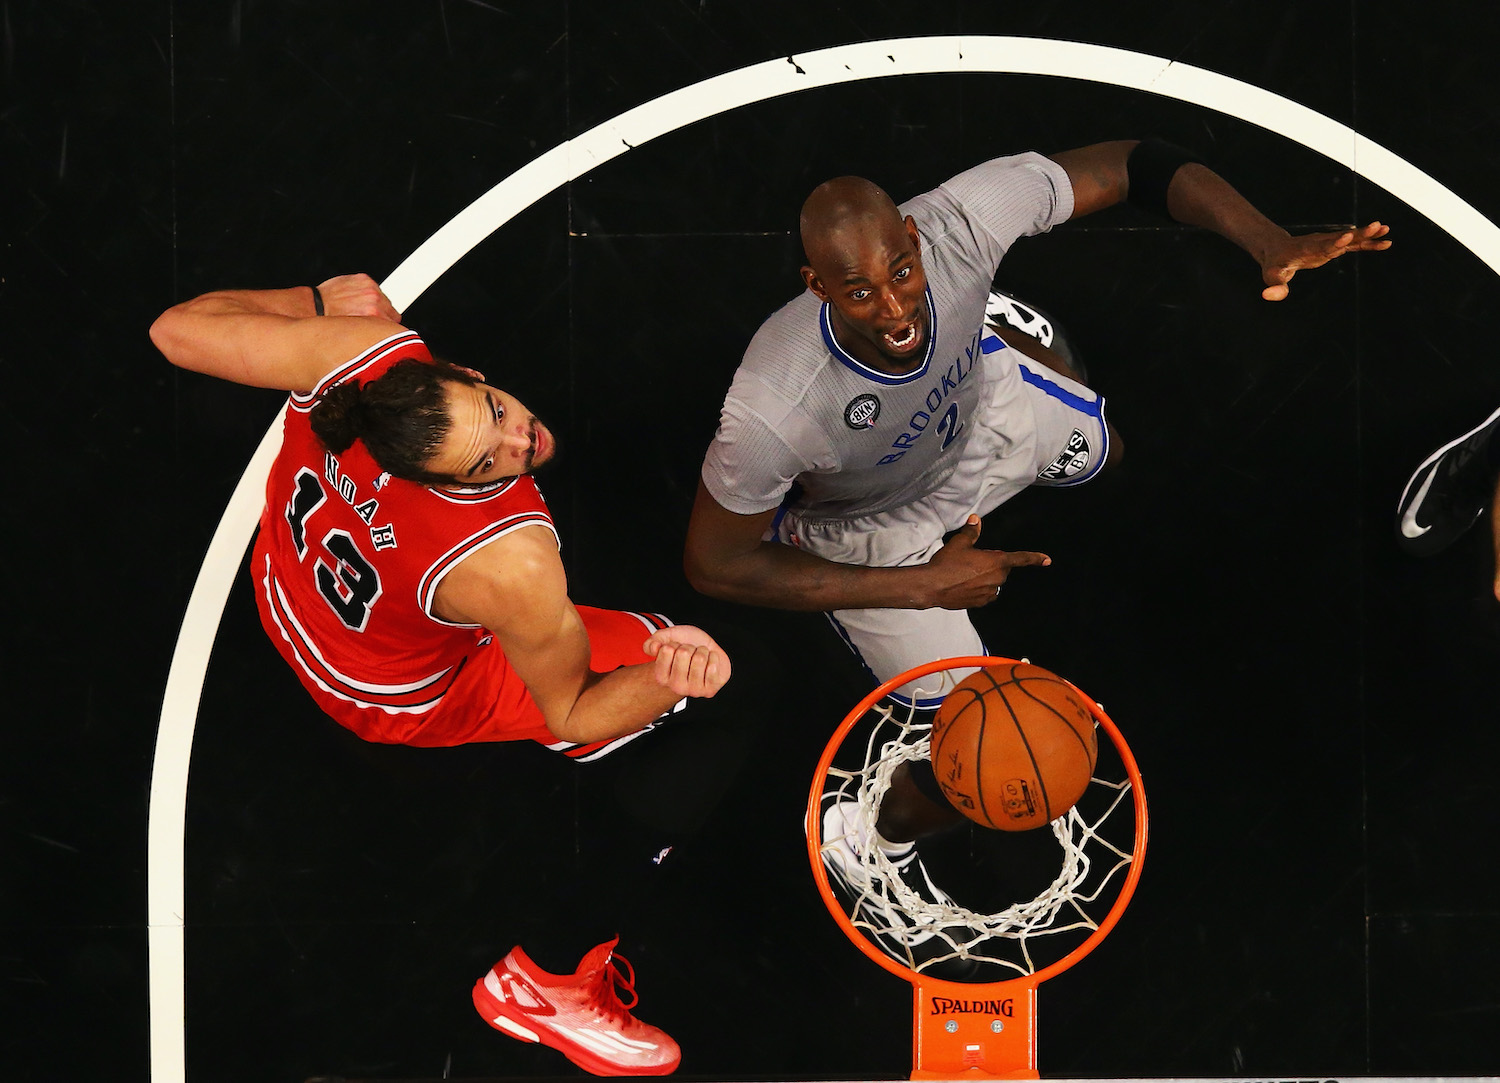 Joakim Noah of the Chicago Bulls and Kevin Garnett of the Brooklyn Nets position themselves for a rebound.